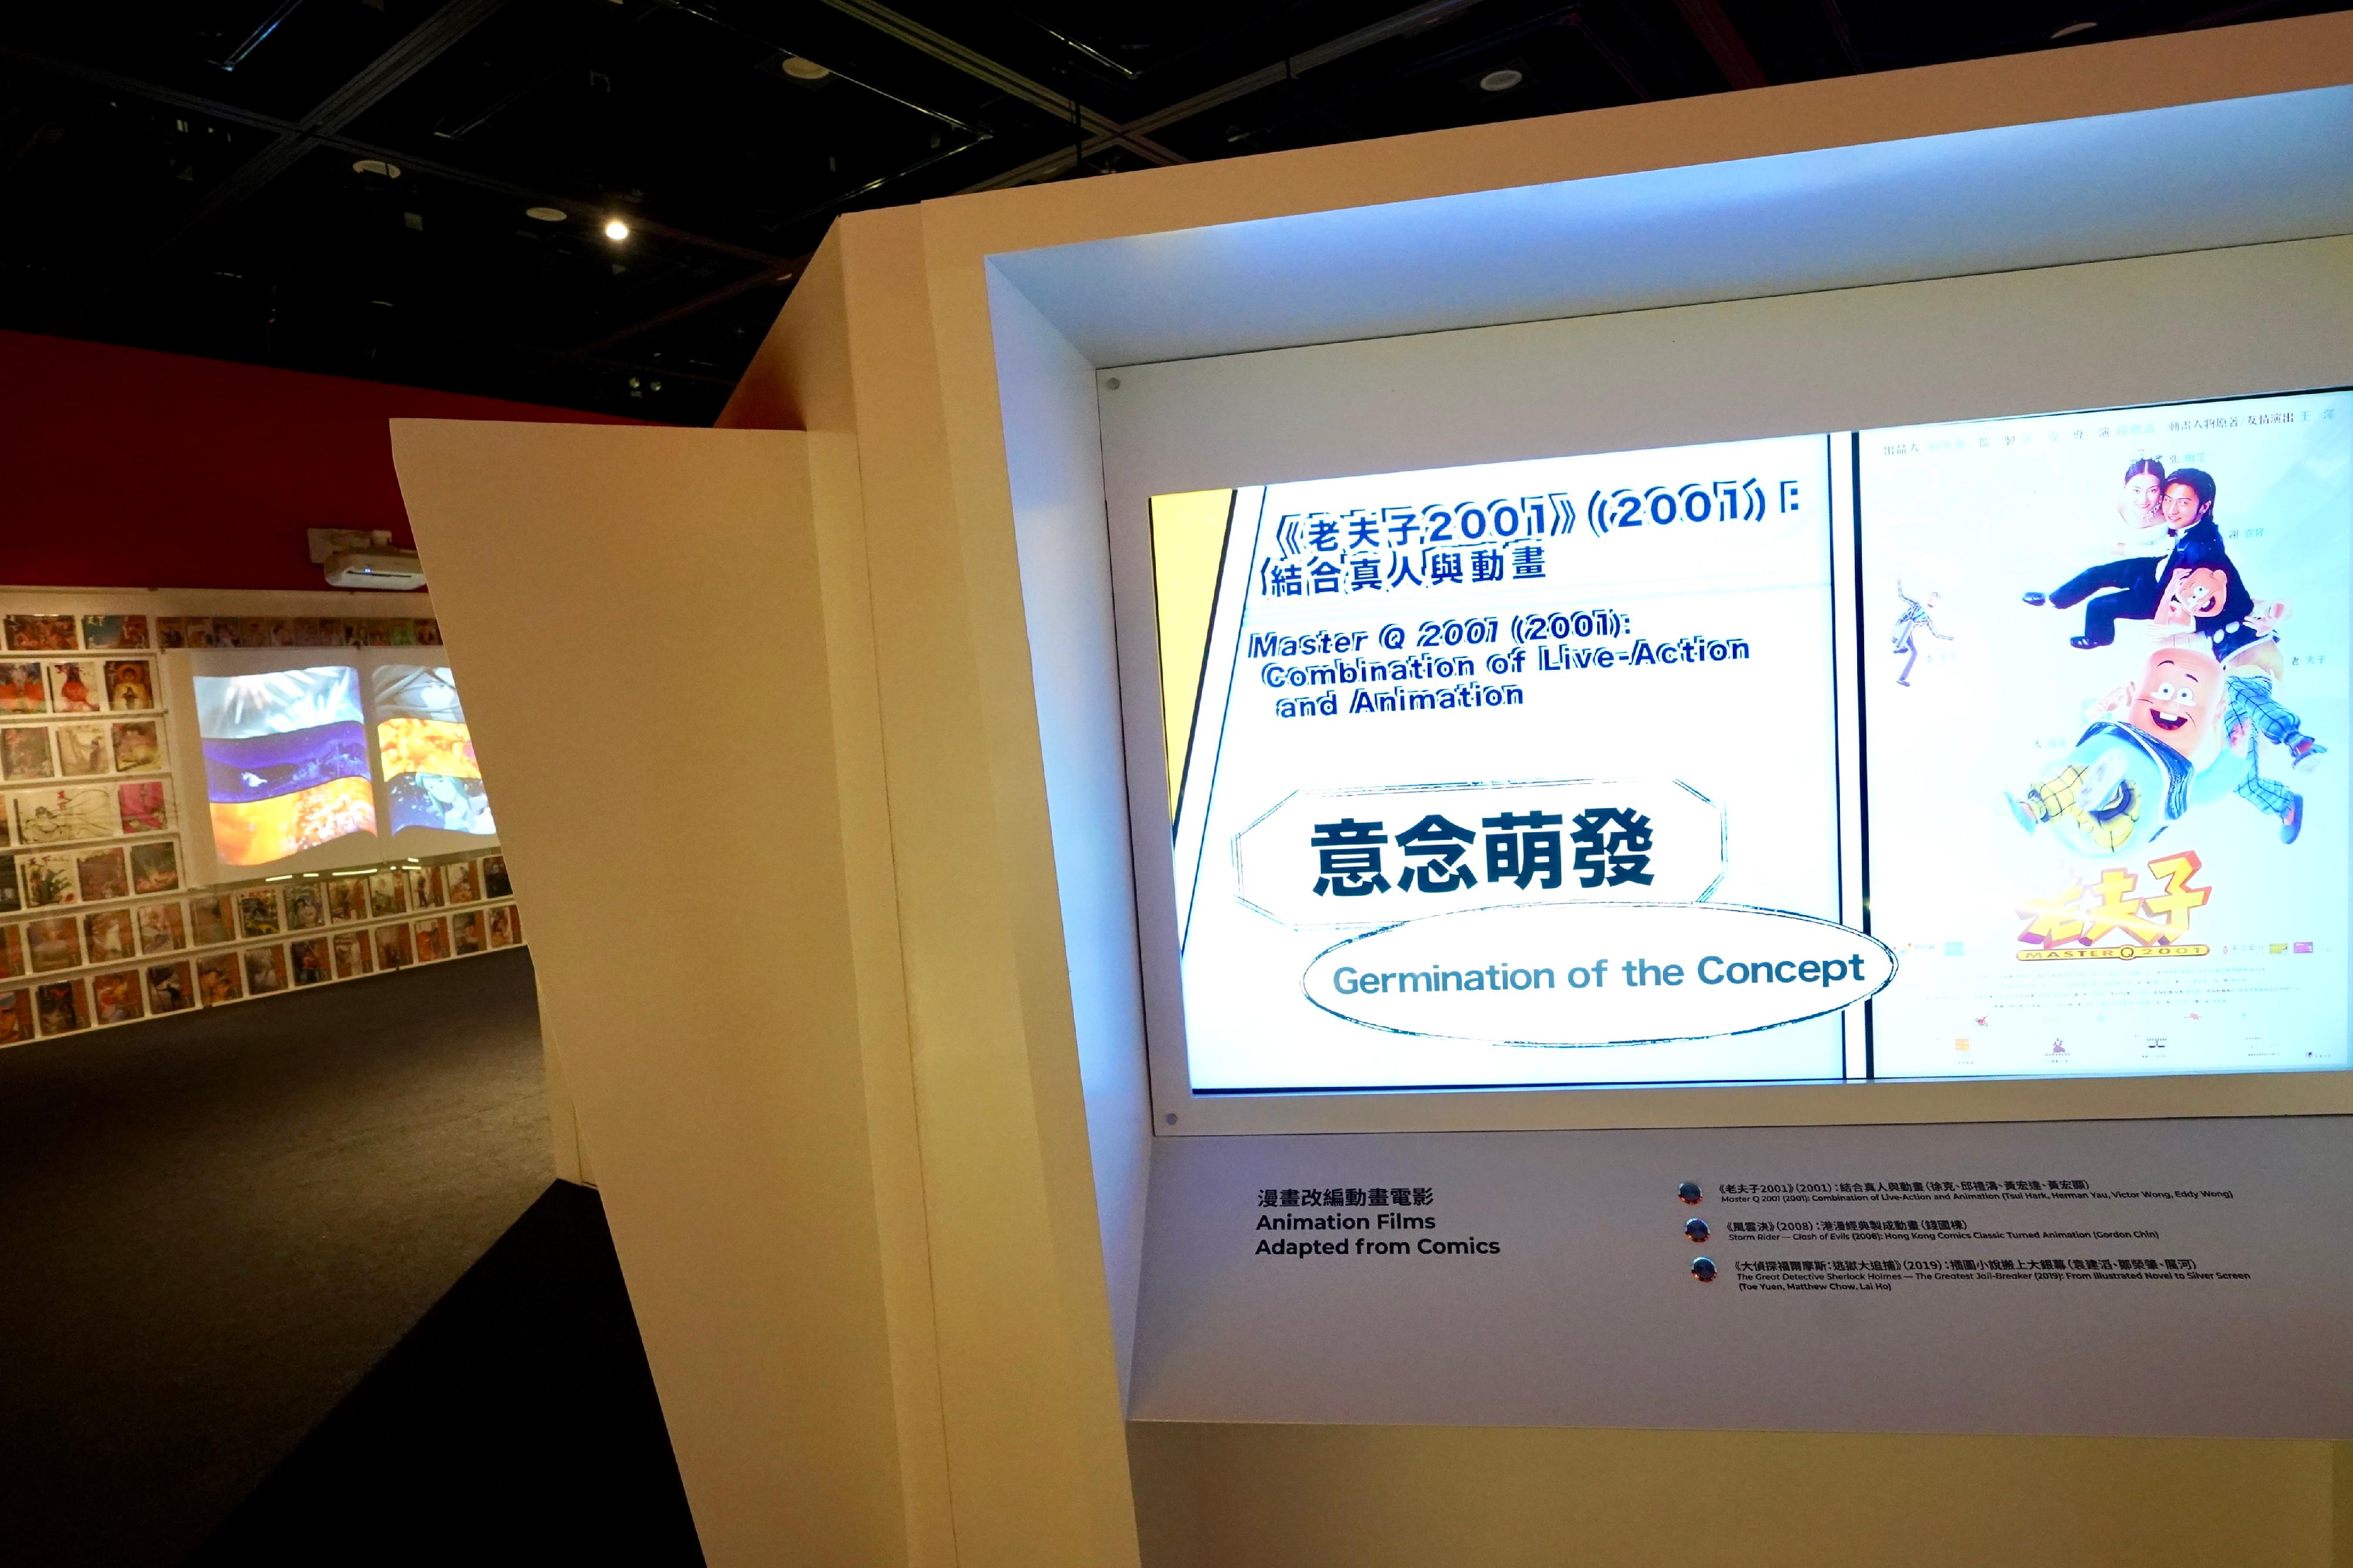 The exhibition "Tango Between Images - Hong Kong Films & Comics", organised by the Hong Kong Film Archive (HKFA) of the Leisure and Cultural Services Department, is being held from today (February 24) to October 8 at the Exhibition Hall of the HKFA. Photo shows a short video introducing animation films that were adapted from comics. 